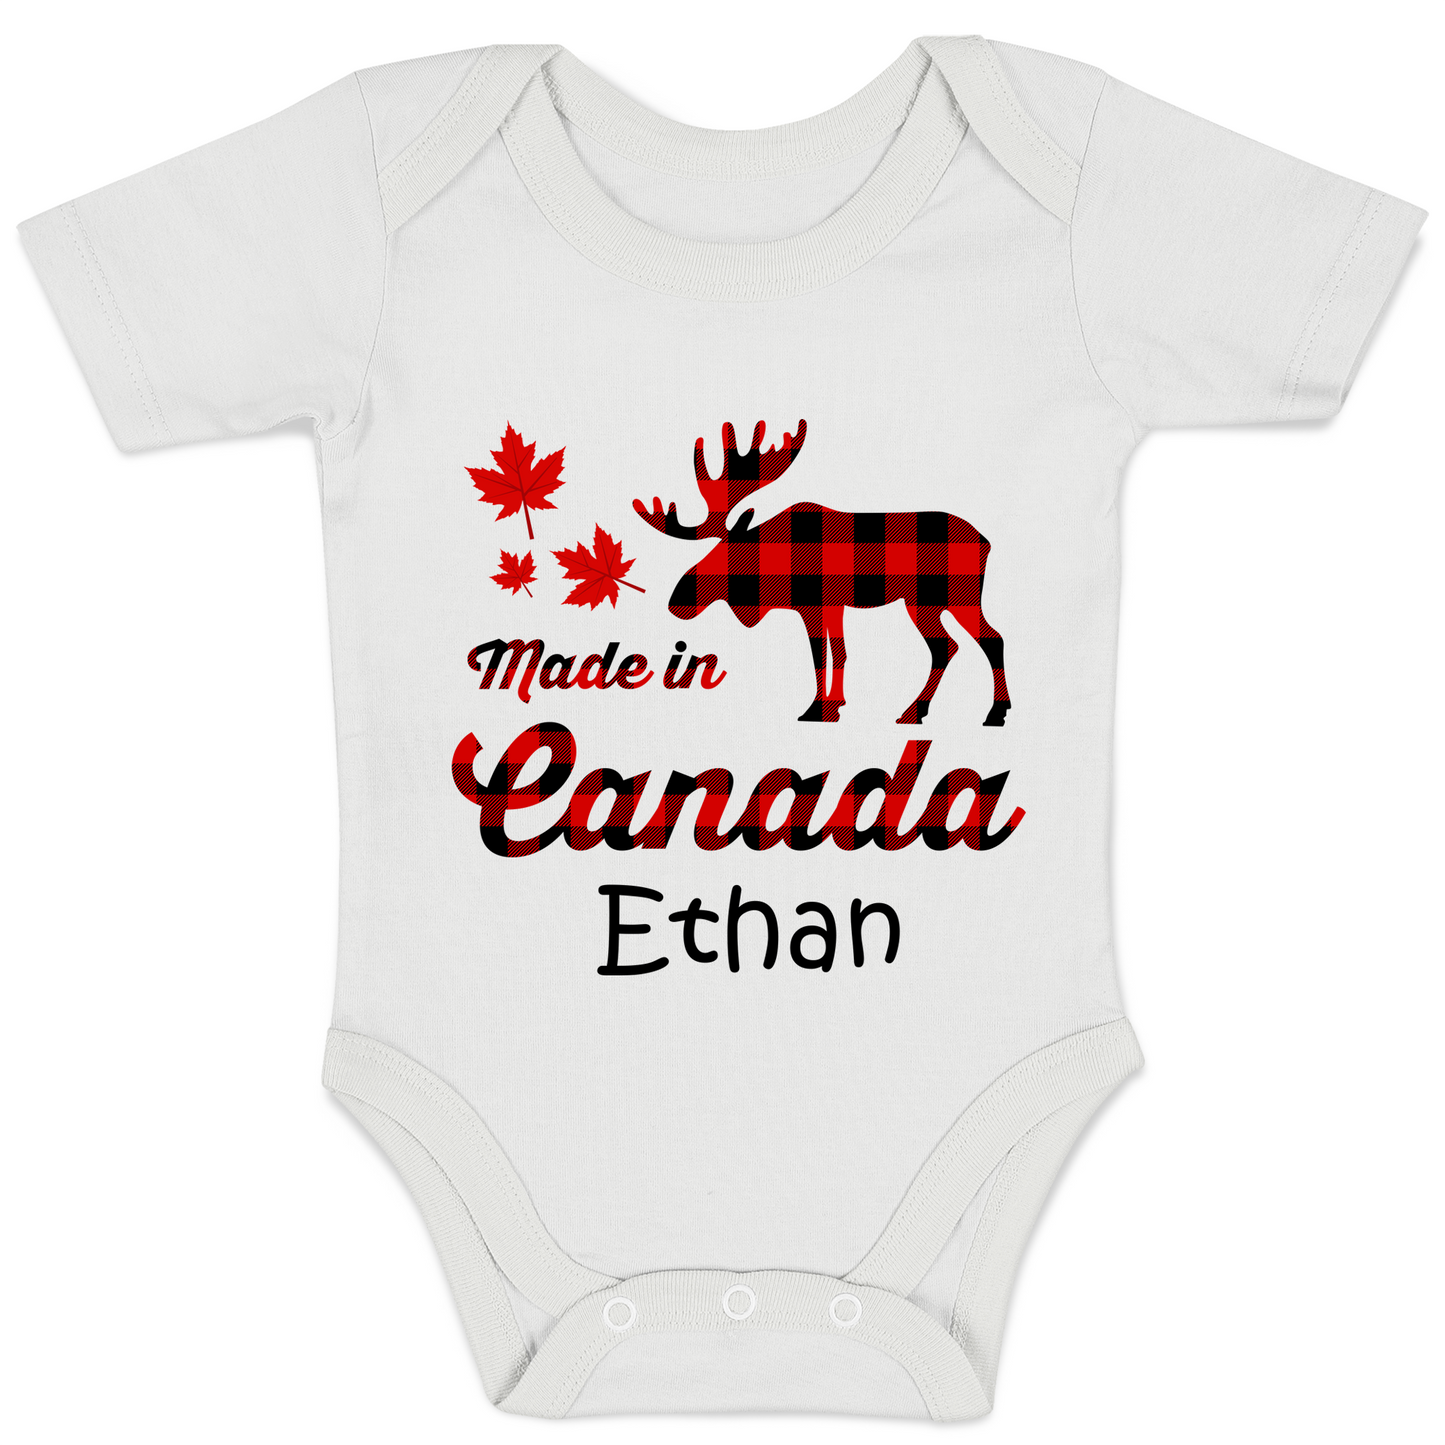 [Personalized] Endanzoo Organic Baby Bodysuit - Made in Canada